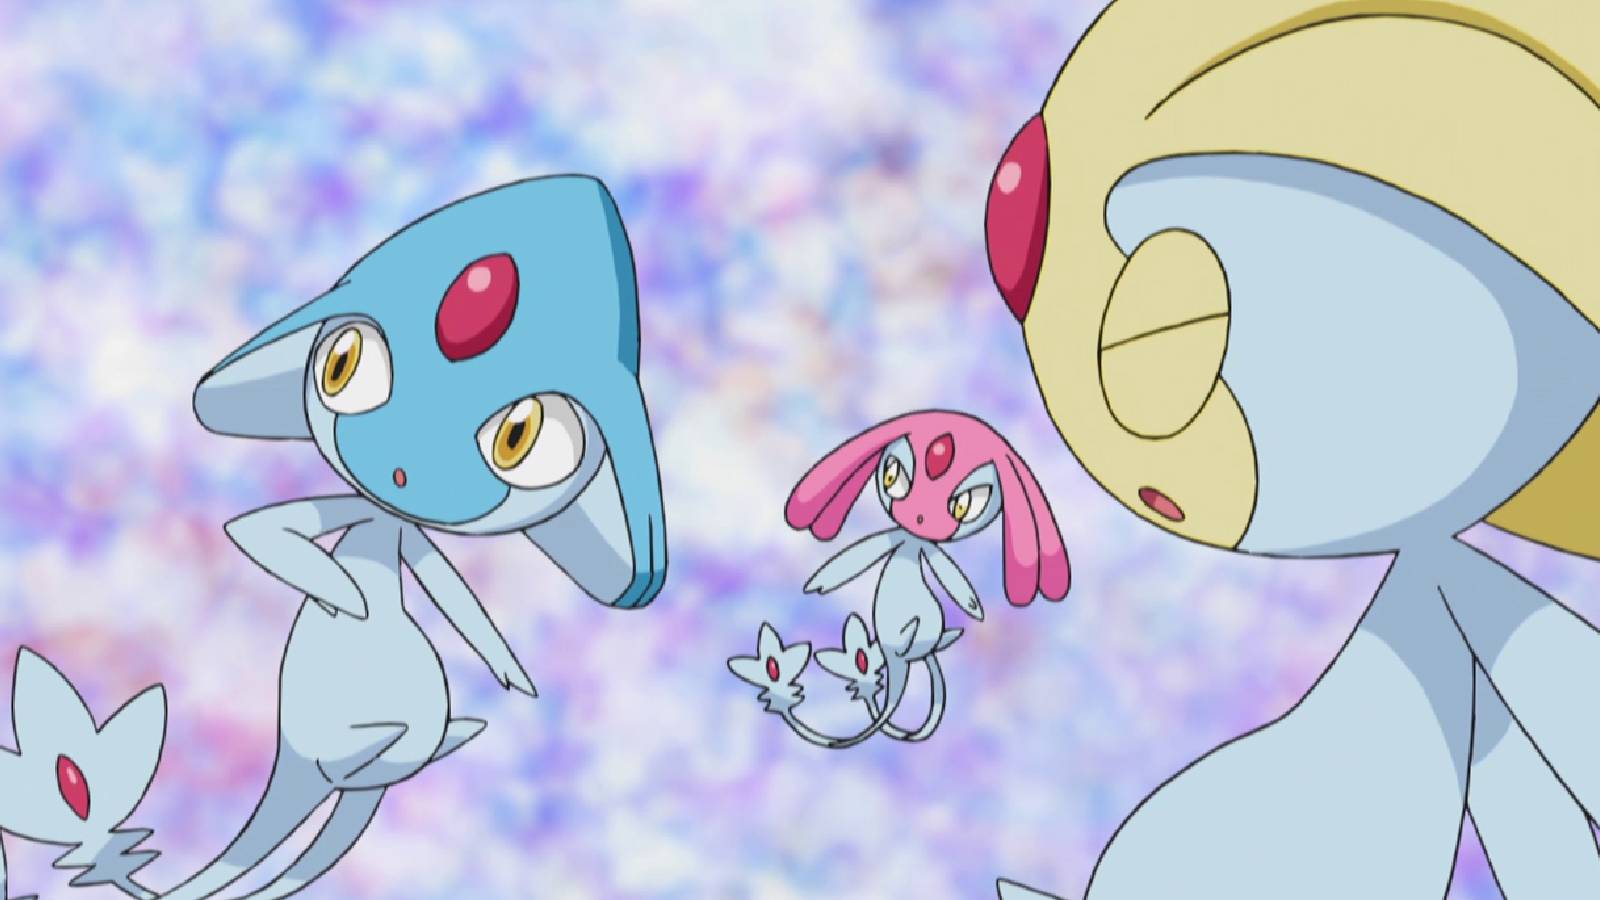 The Pokemon Azelf, Uxie, and Mesprit are shown in a screenshot from the anime